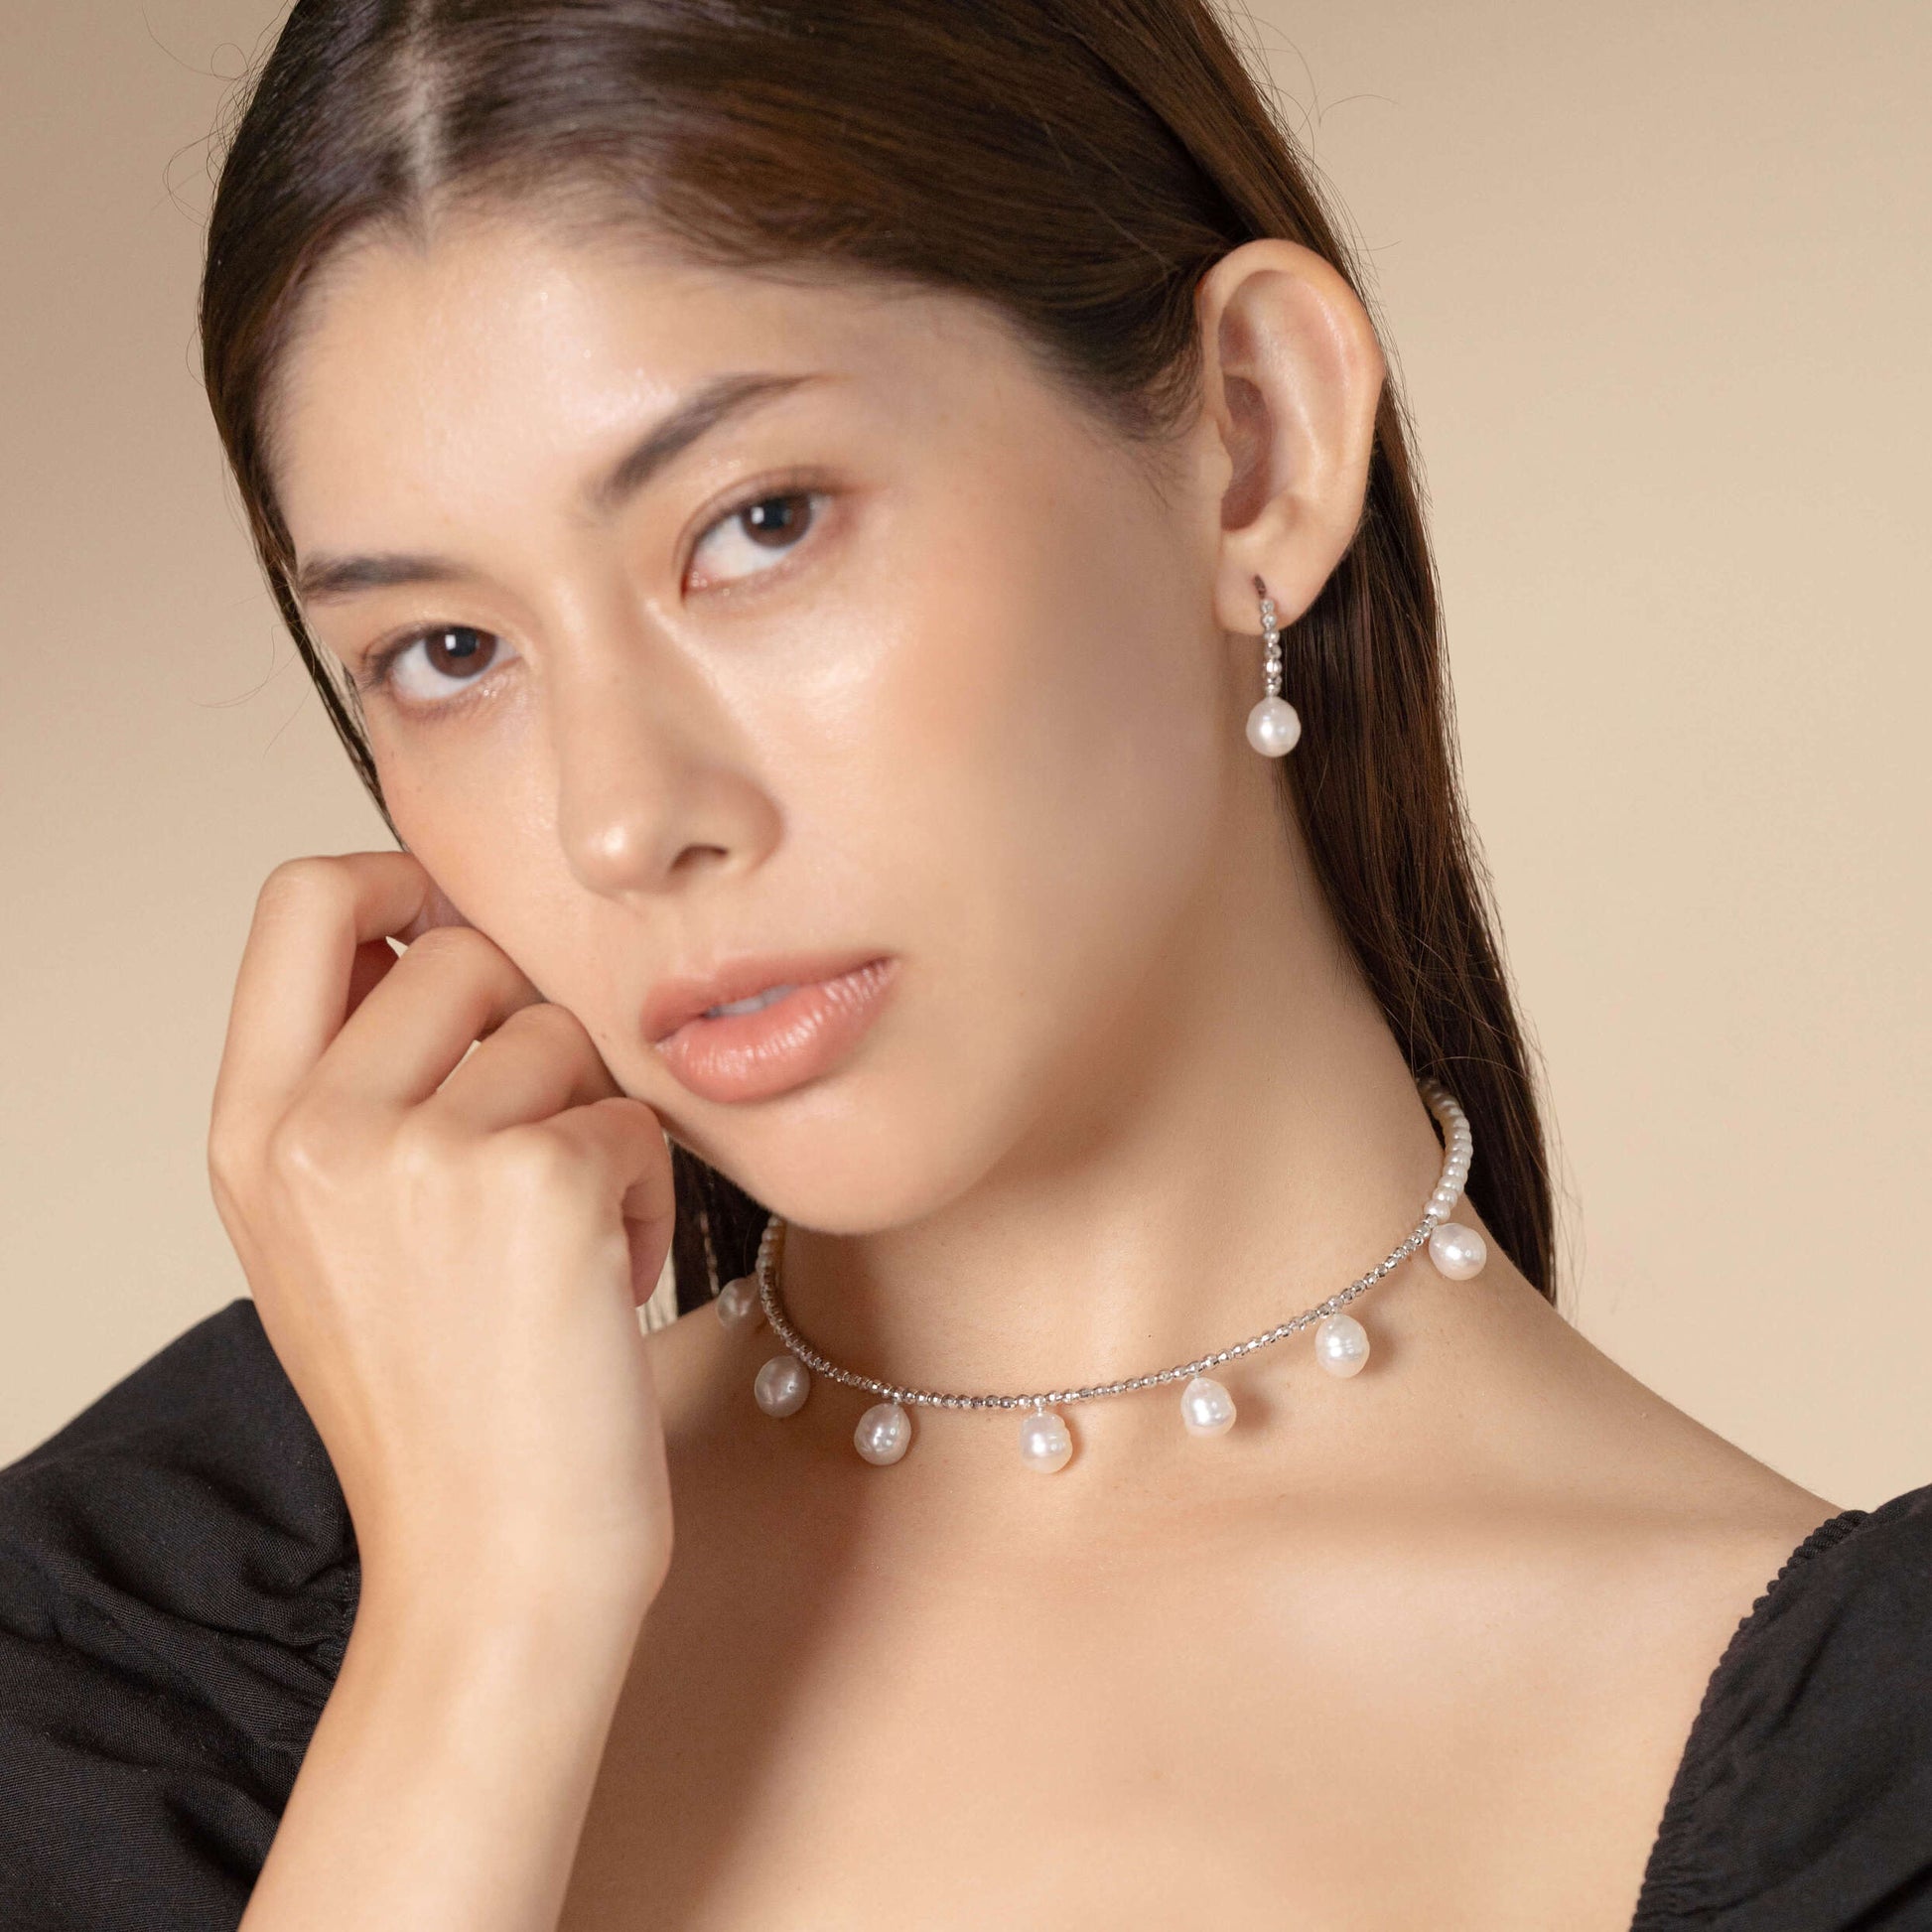 Embrace timeless beauty with a pearl necklace and piercing. A touch of luxury for the modern woman.